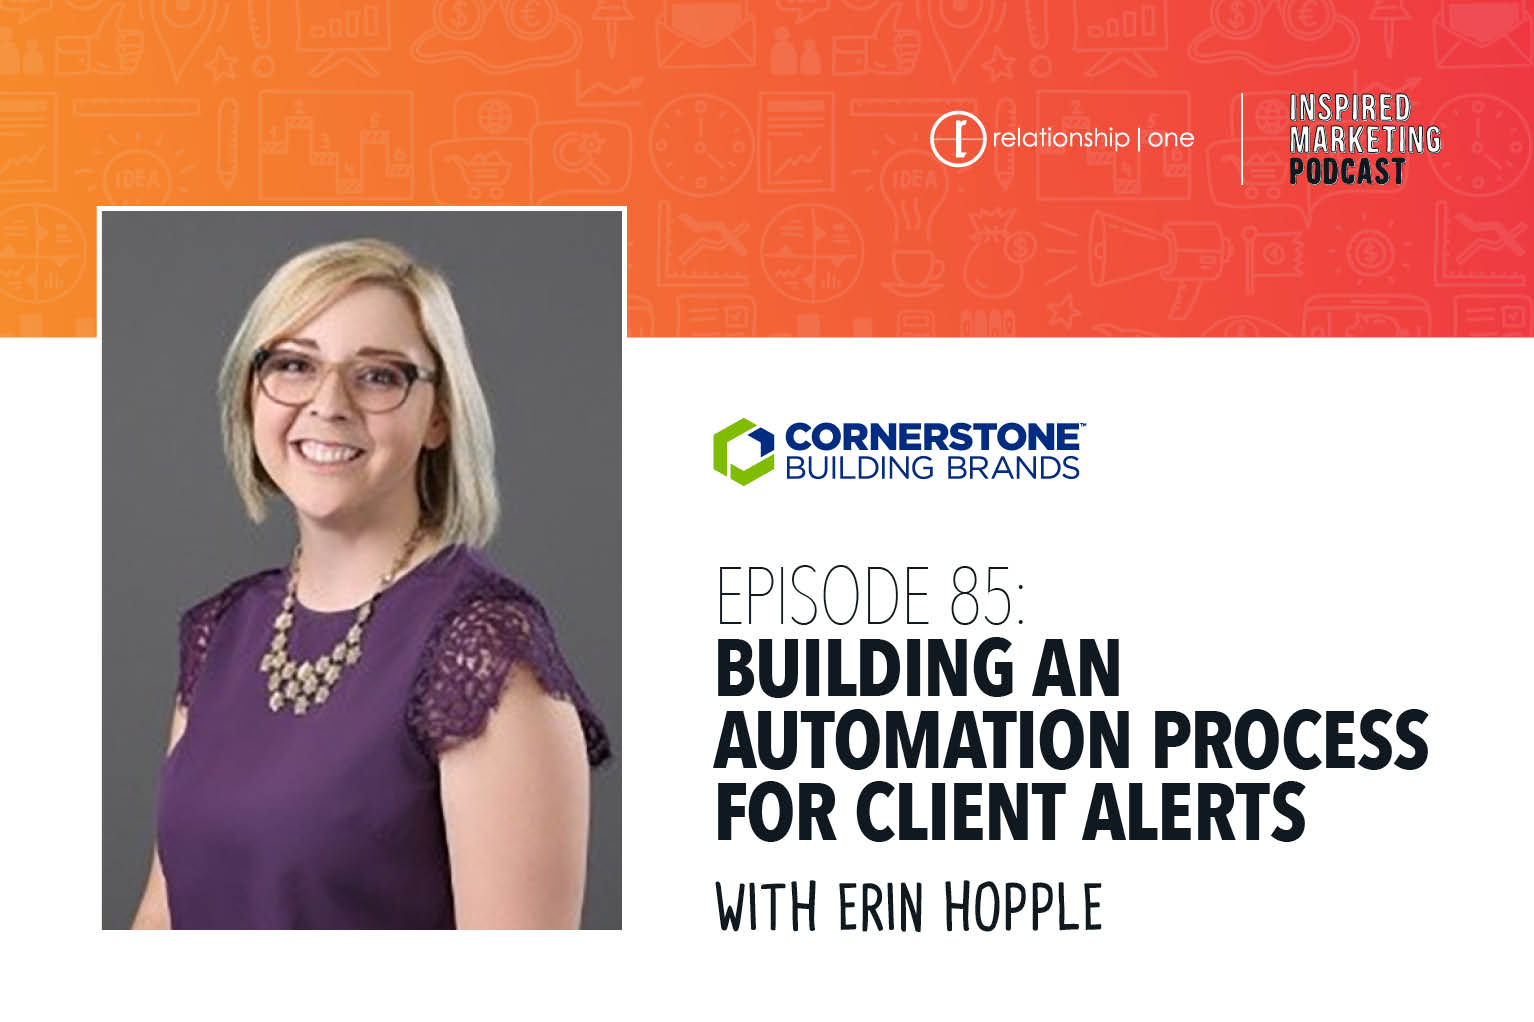 Inspired Marketing: Cornerstone’s Erin Hopple on Building an Automation Process for Client Alerts